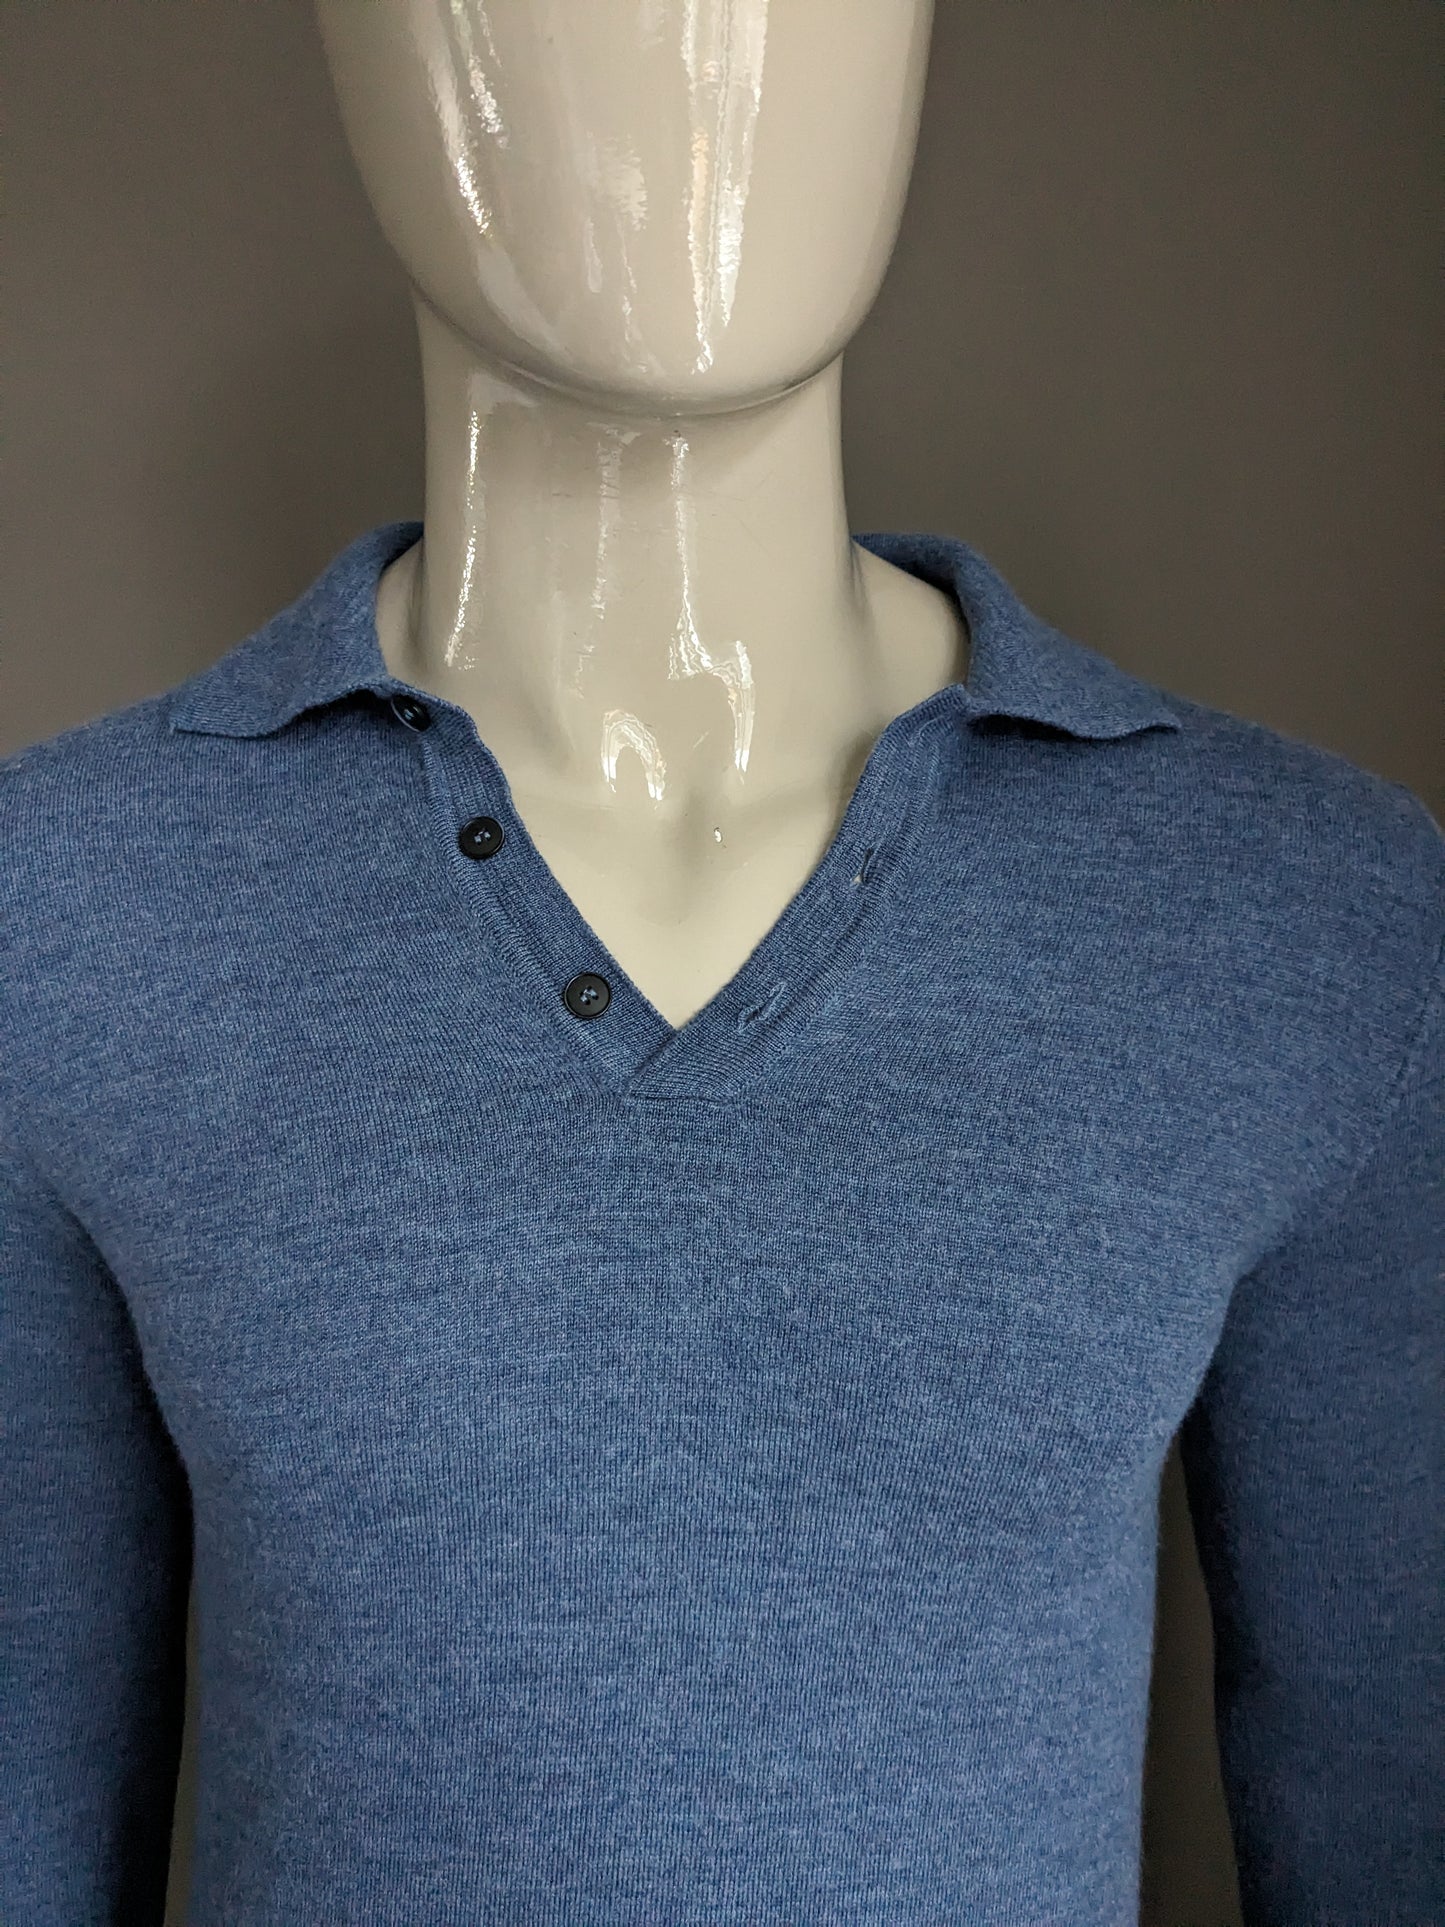 Don Hering Merino wool polo sweater. Blue mixed. Size S.